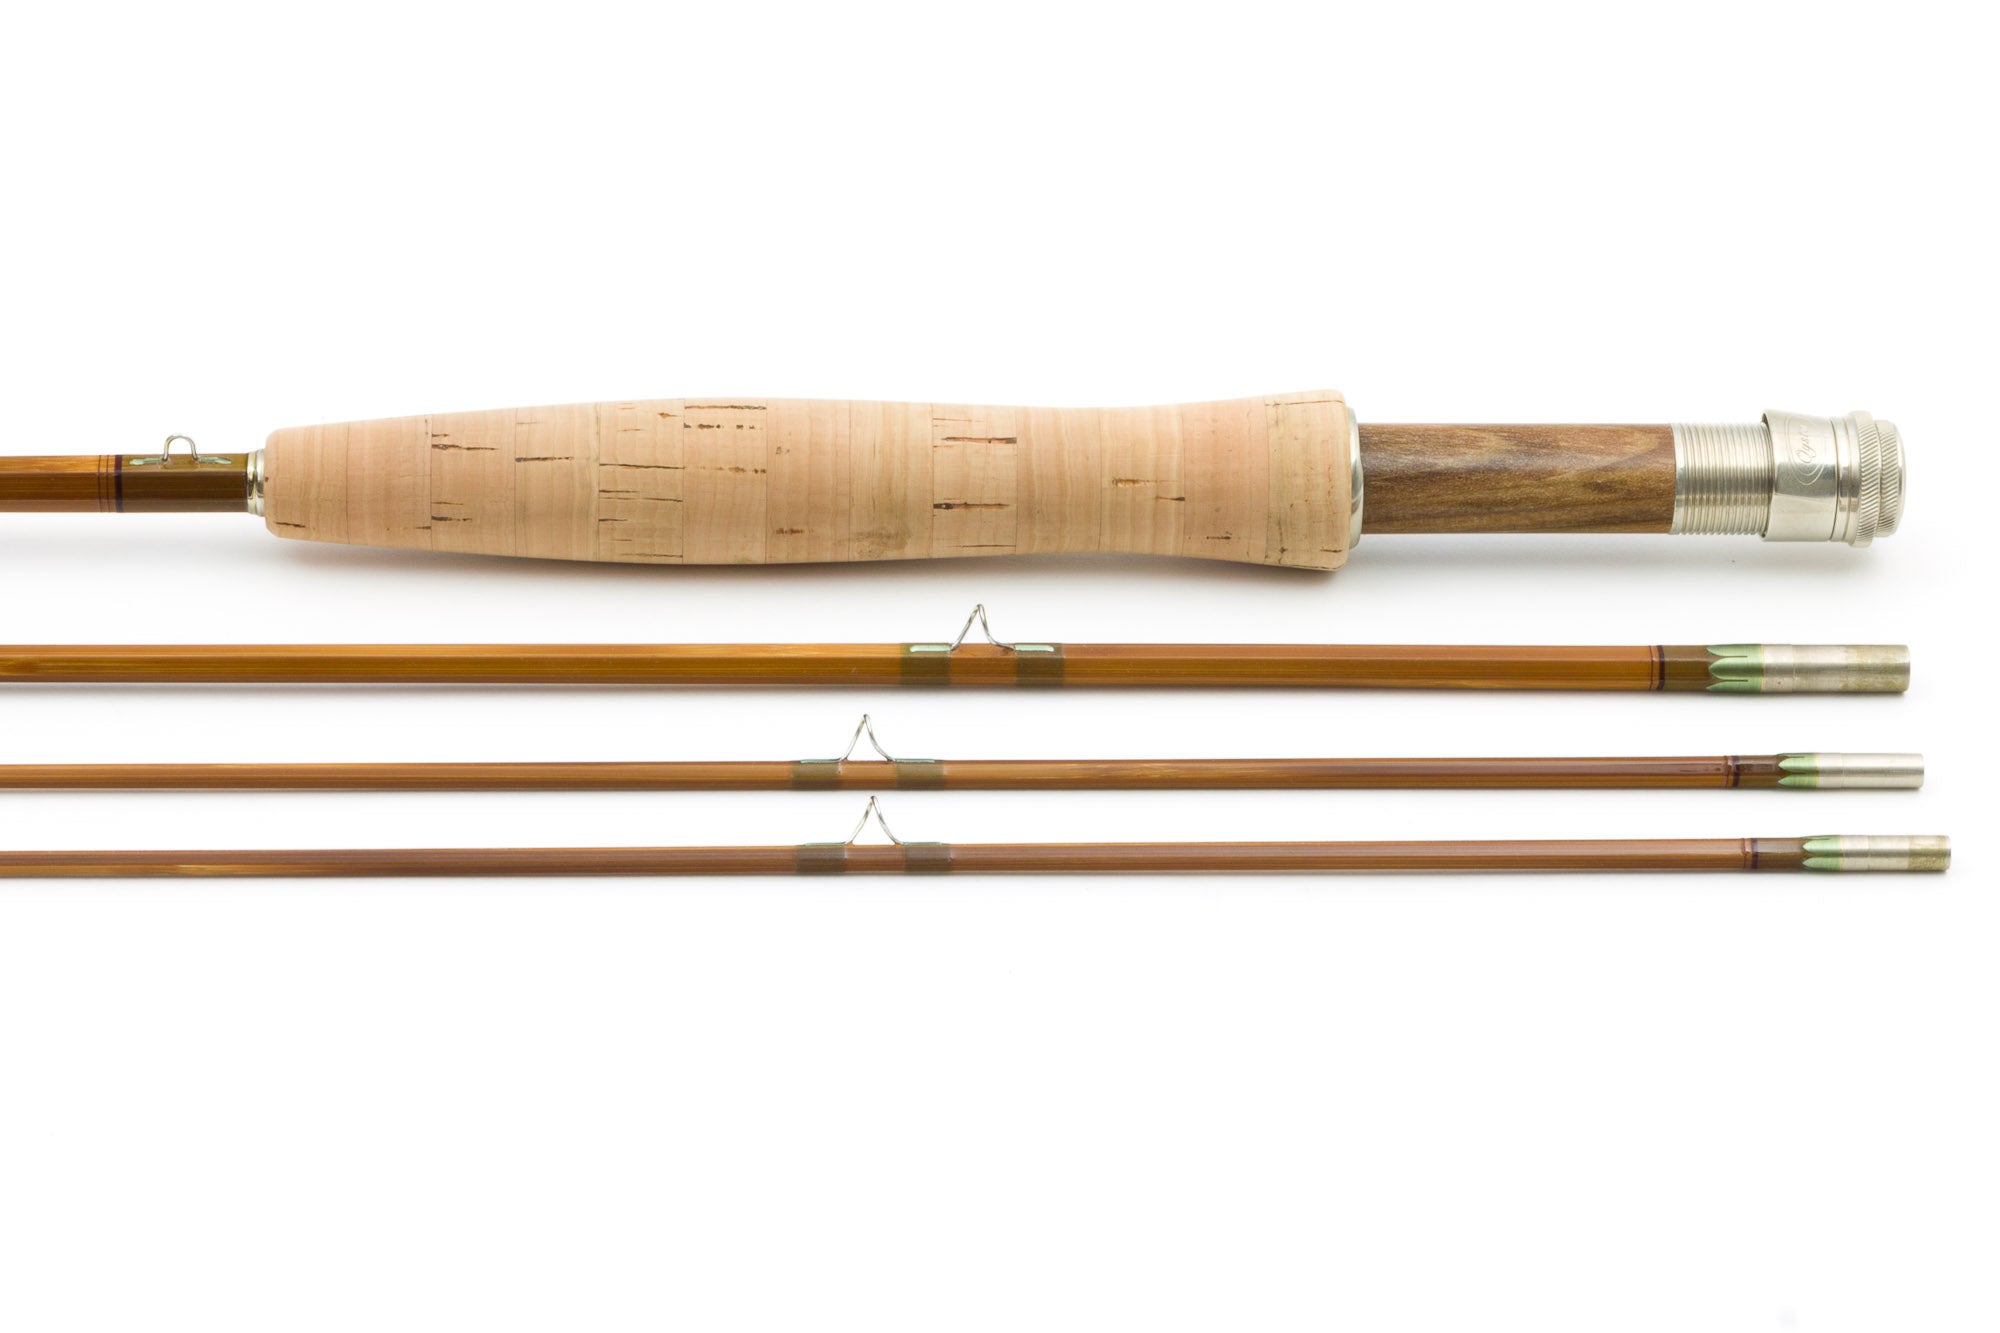 Oyster, Bill - 7'6 4wt 3/2 Bamboo Fly Rod - Freestone Vintage Tackle